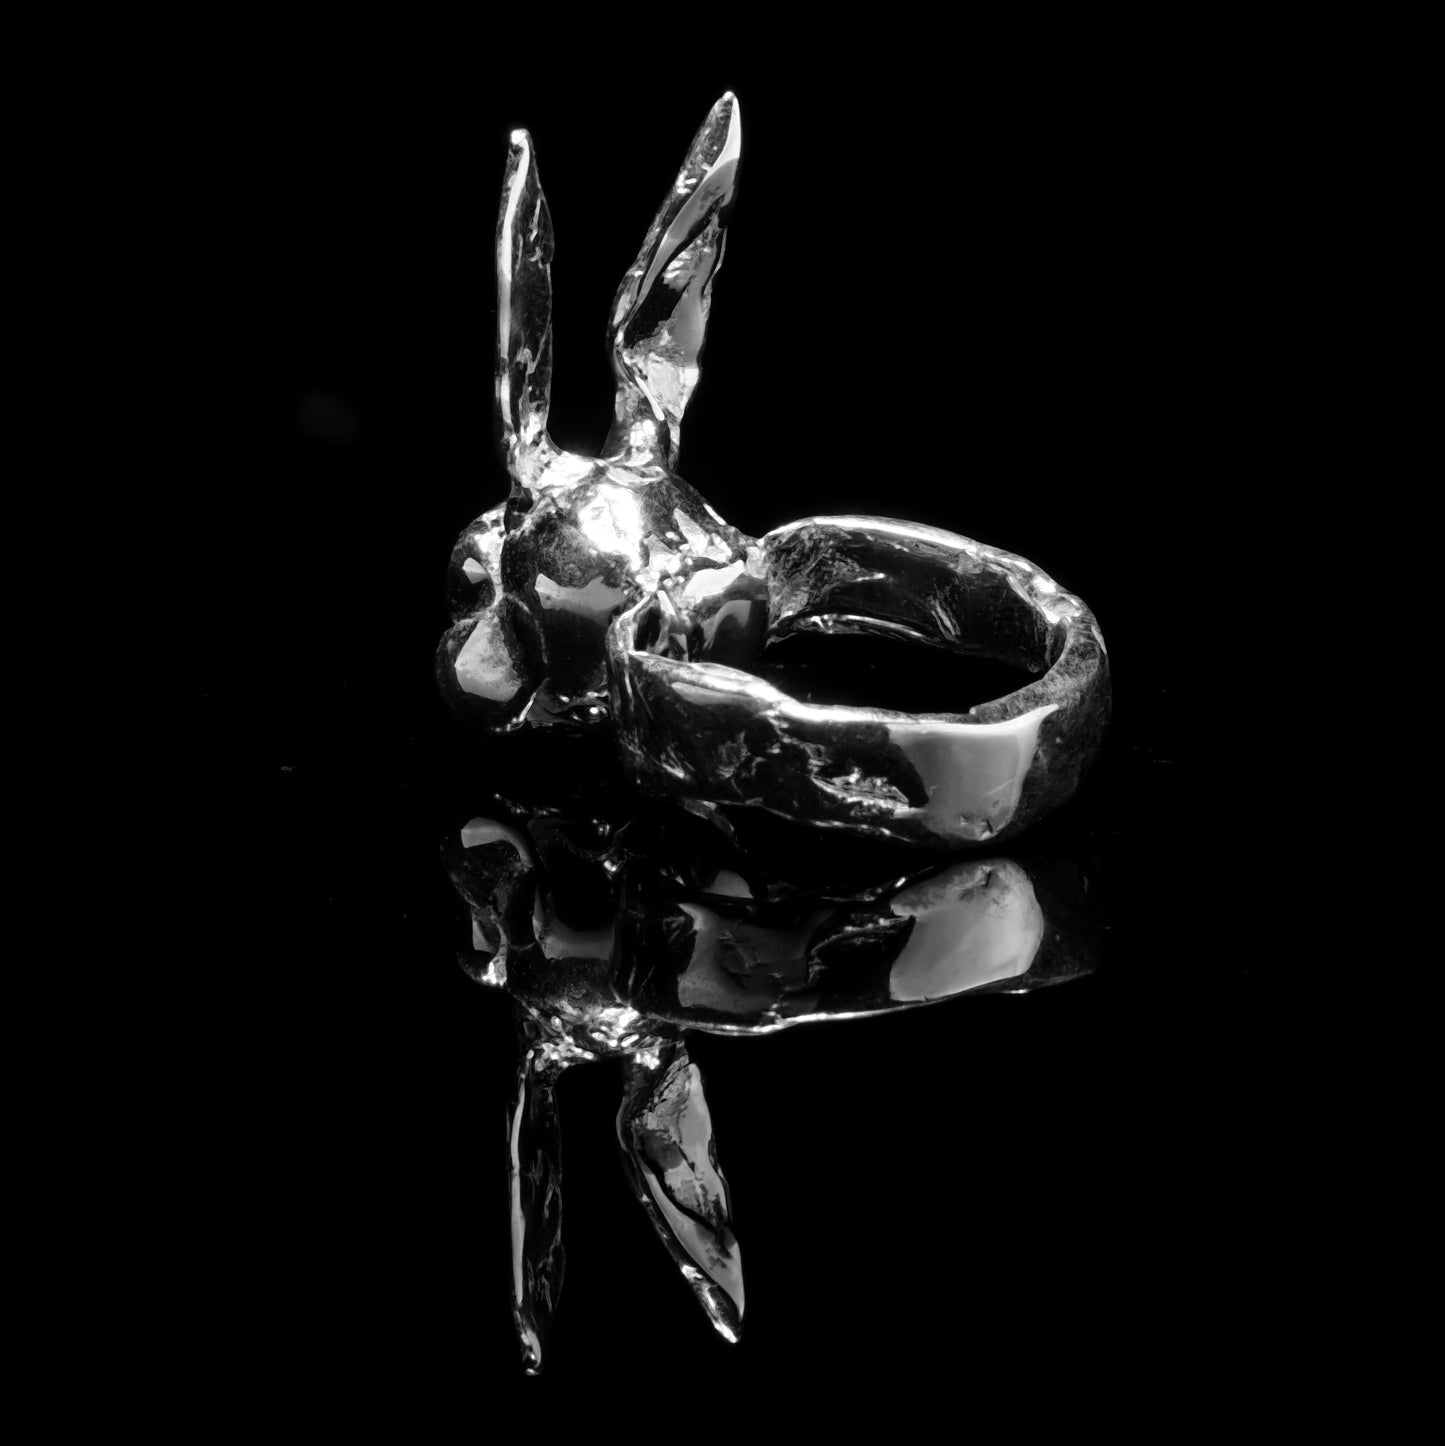 Donnie Darko Silver Skull Bunny Head Statement Ring - Handmade Frank the Bunny Inspired - Perfect Easter Gift- Medium size